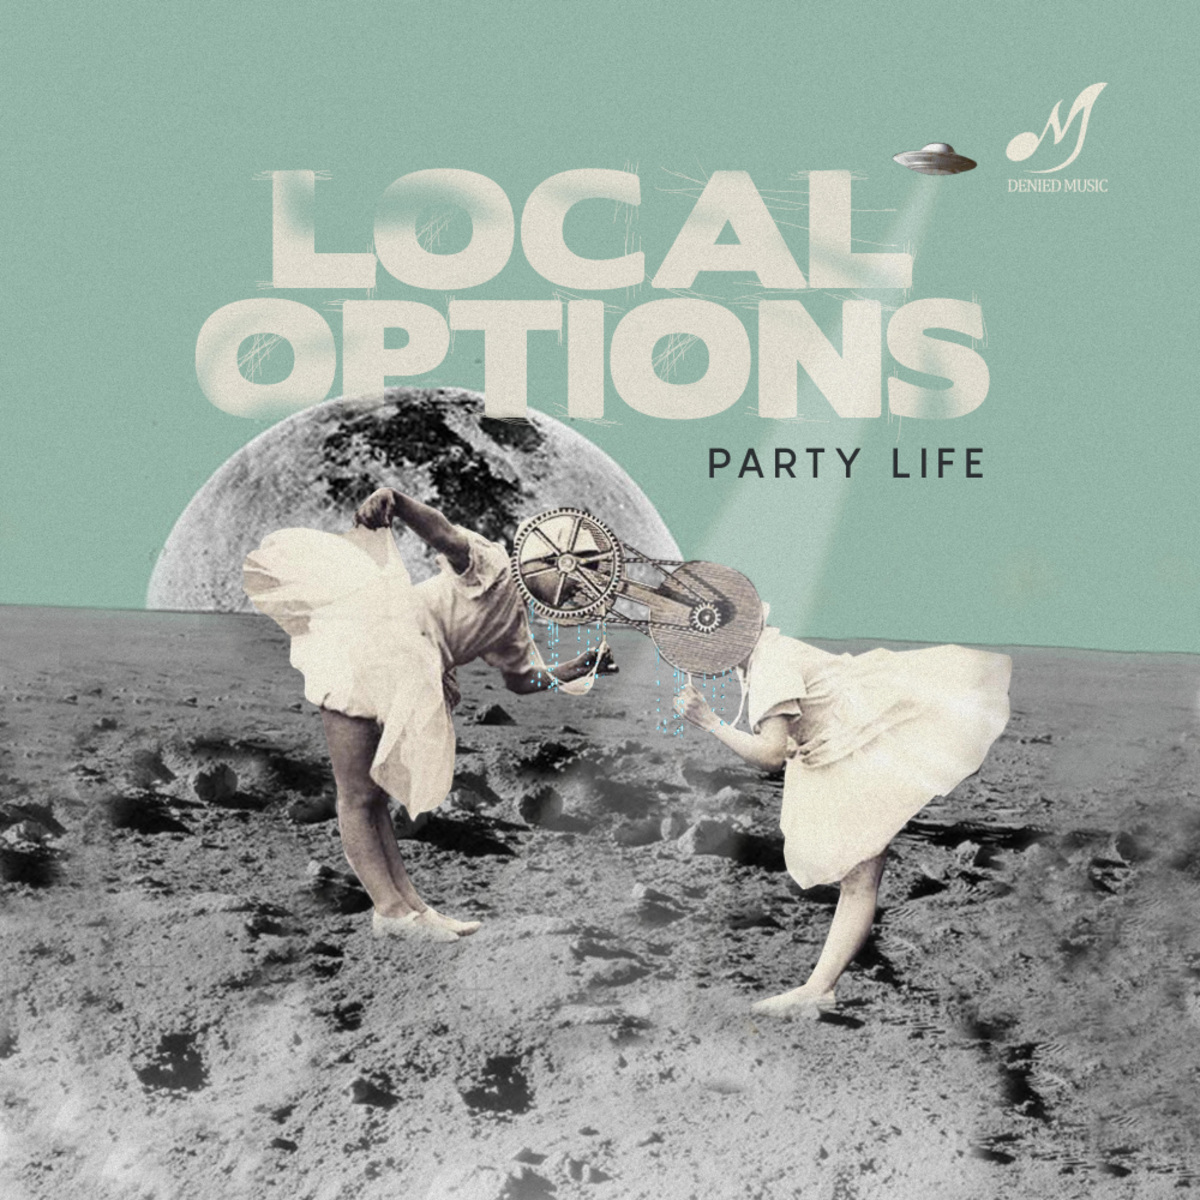 Local Options - Party Life / Denied Music